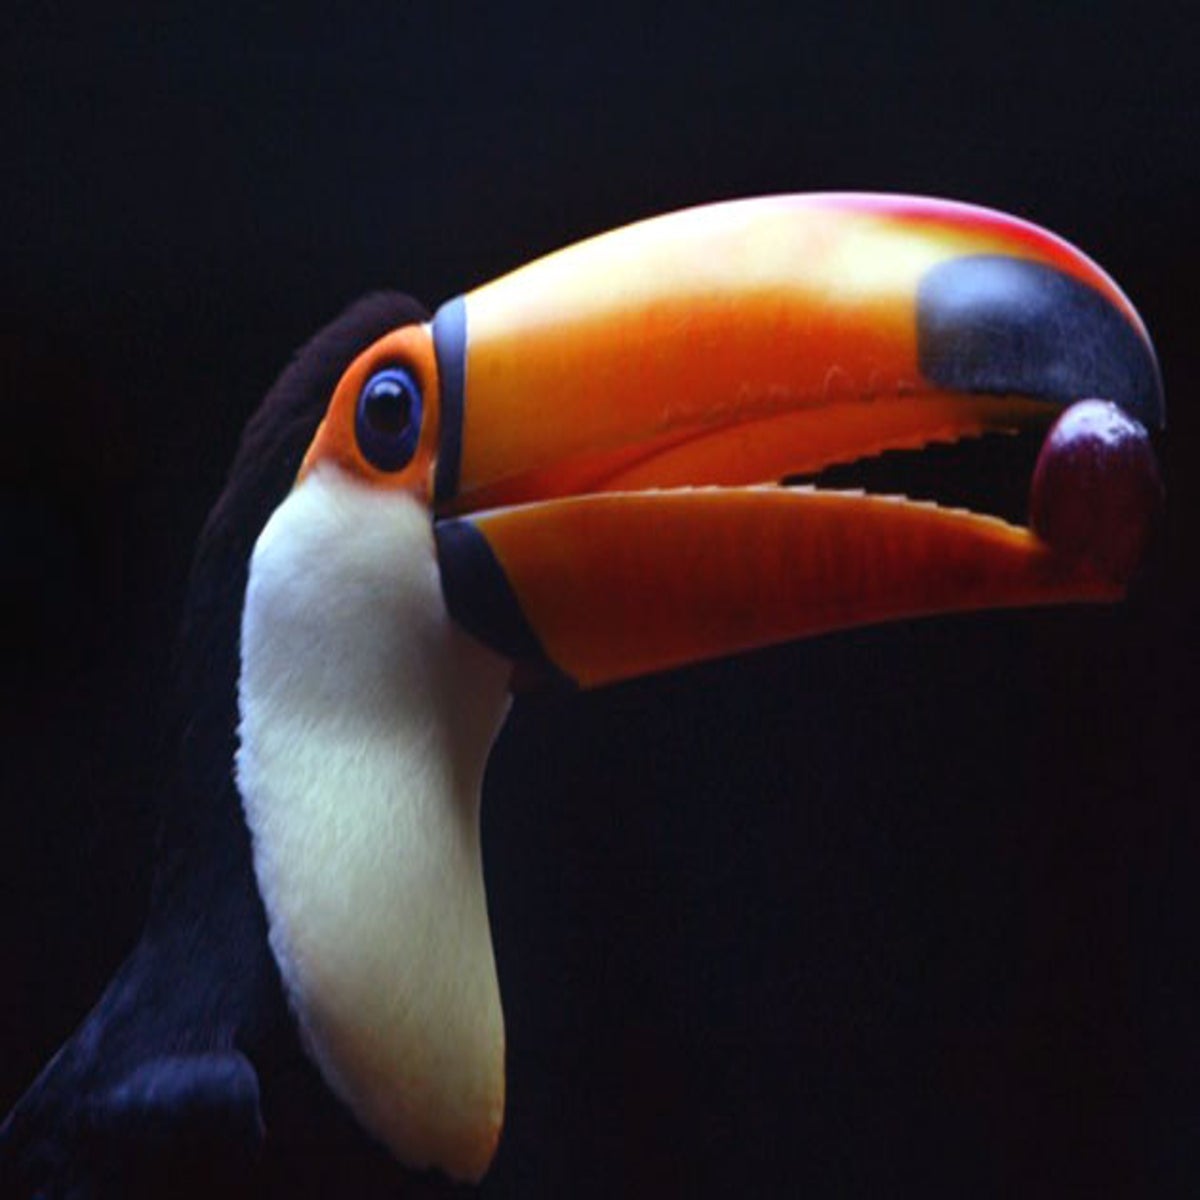 Mystery of the toucan's beak solved | The Independent | The Independent